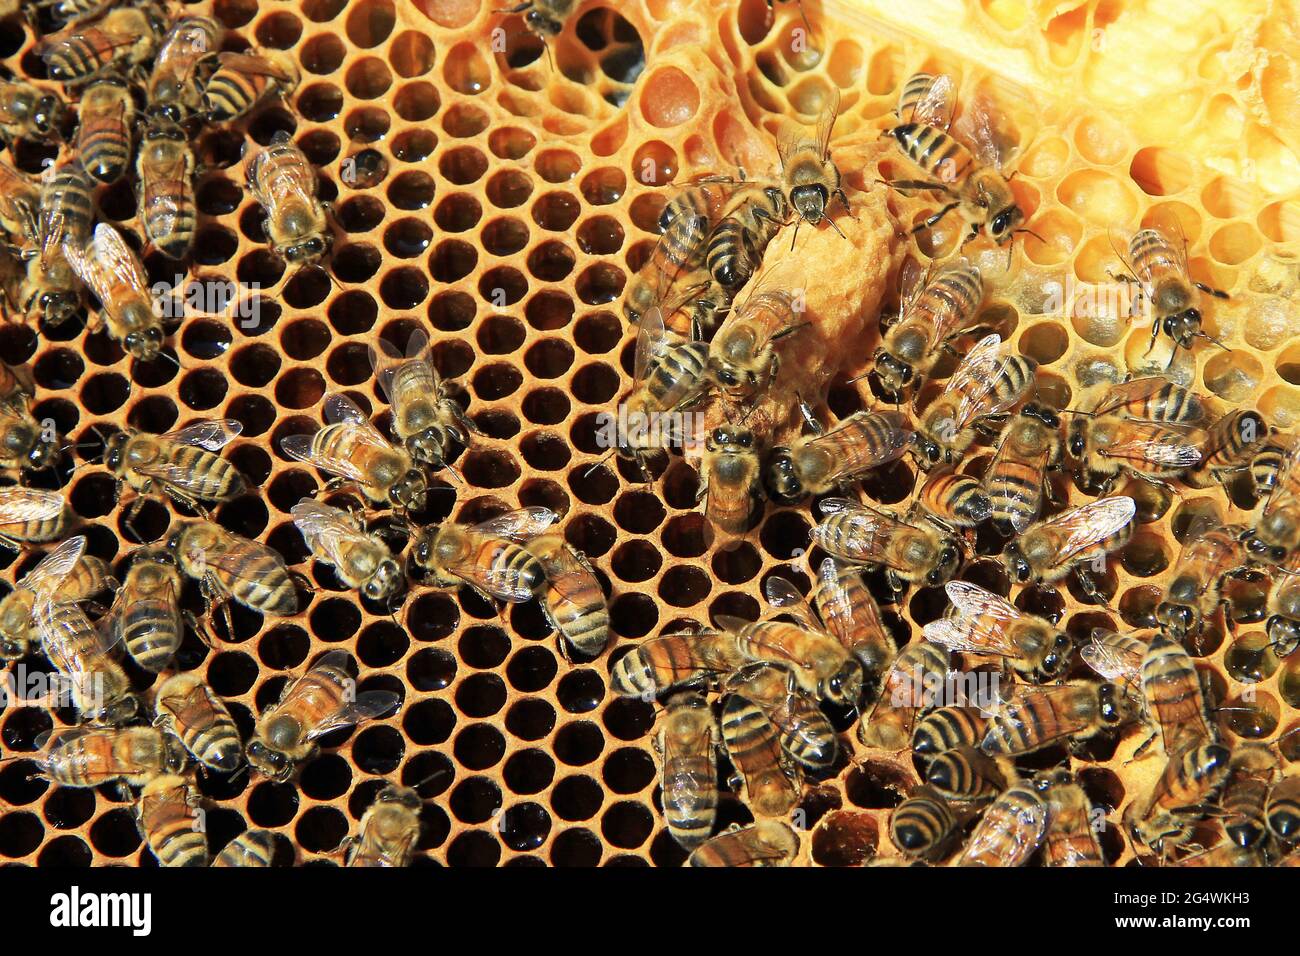 Close-up of nectar filled honey comb and a queen cell with worker bees in a Langstroth  beehive. Stock Photo